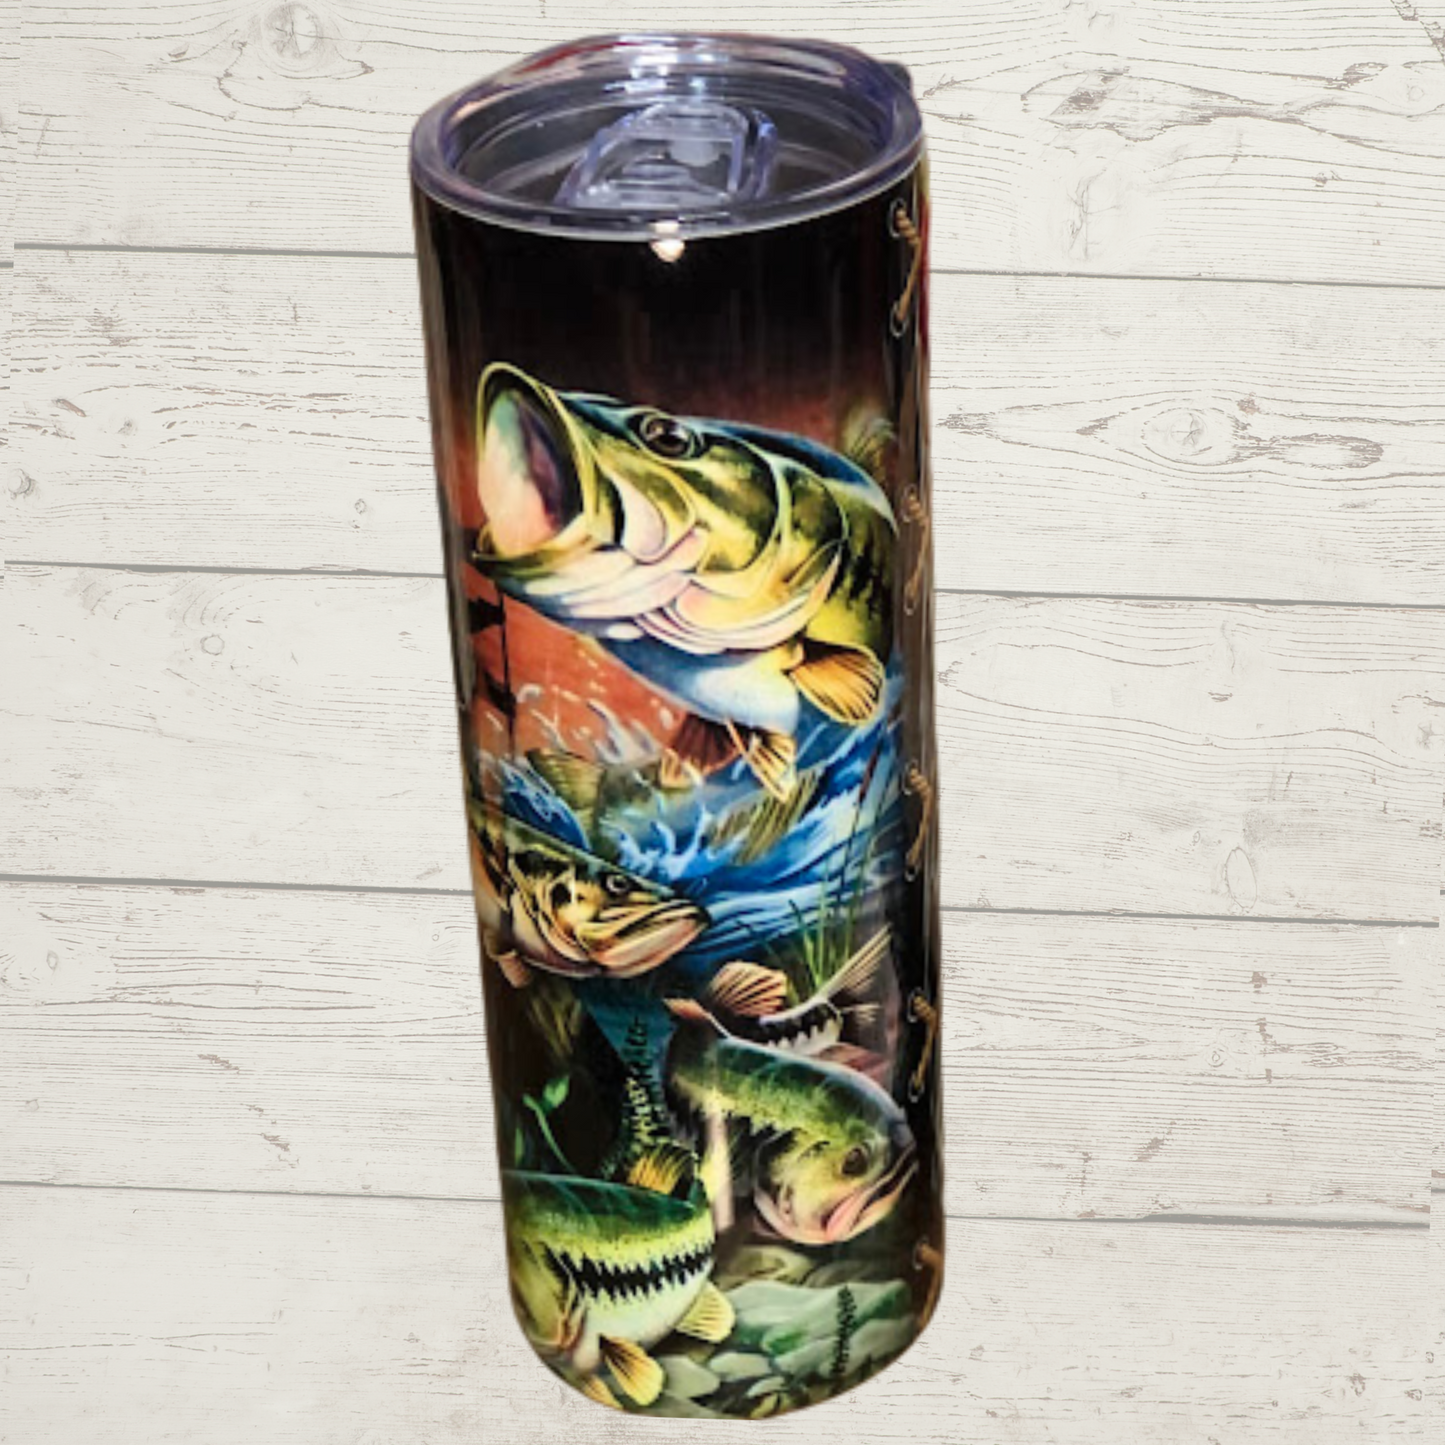 Bass/Fishing/Camoflauge 20 oz skinny sublimation tumbler  vivid Detail image of several bass with one breaking through water with fisherman and boat floating on water in background